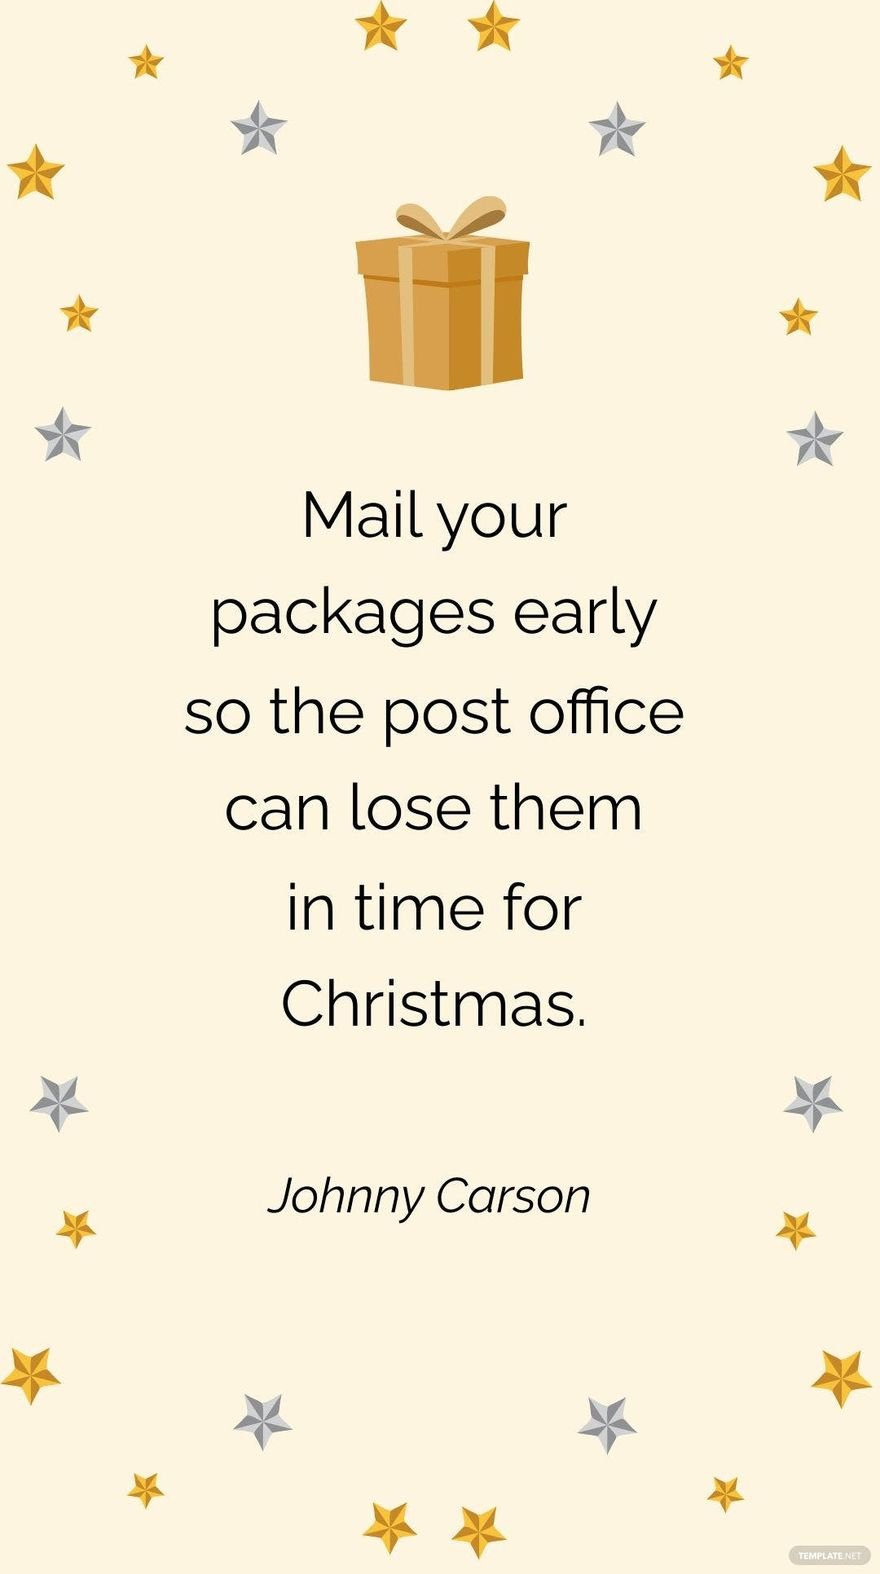 Free Johnny Carson - Mail your packages early so the post office can lose them in time for Christmas.